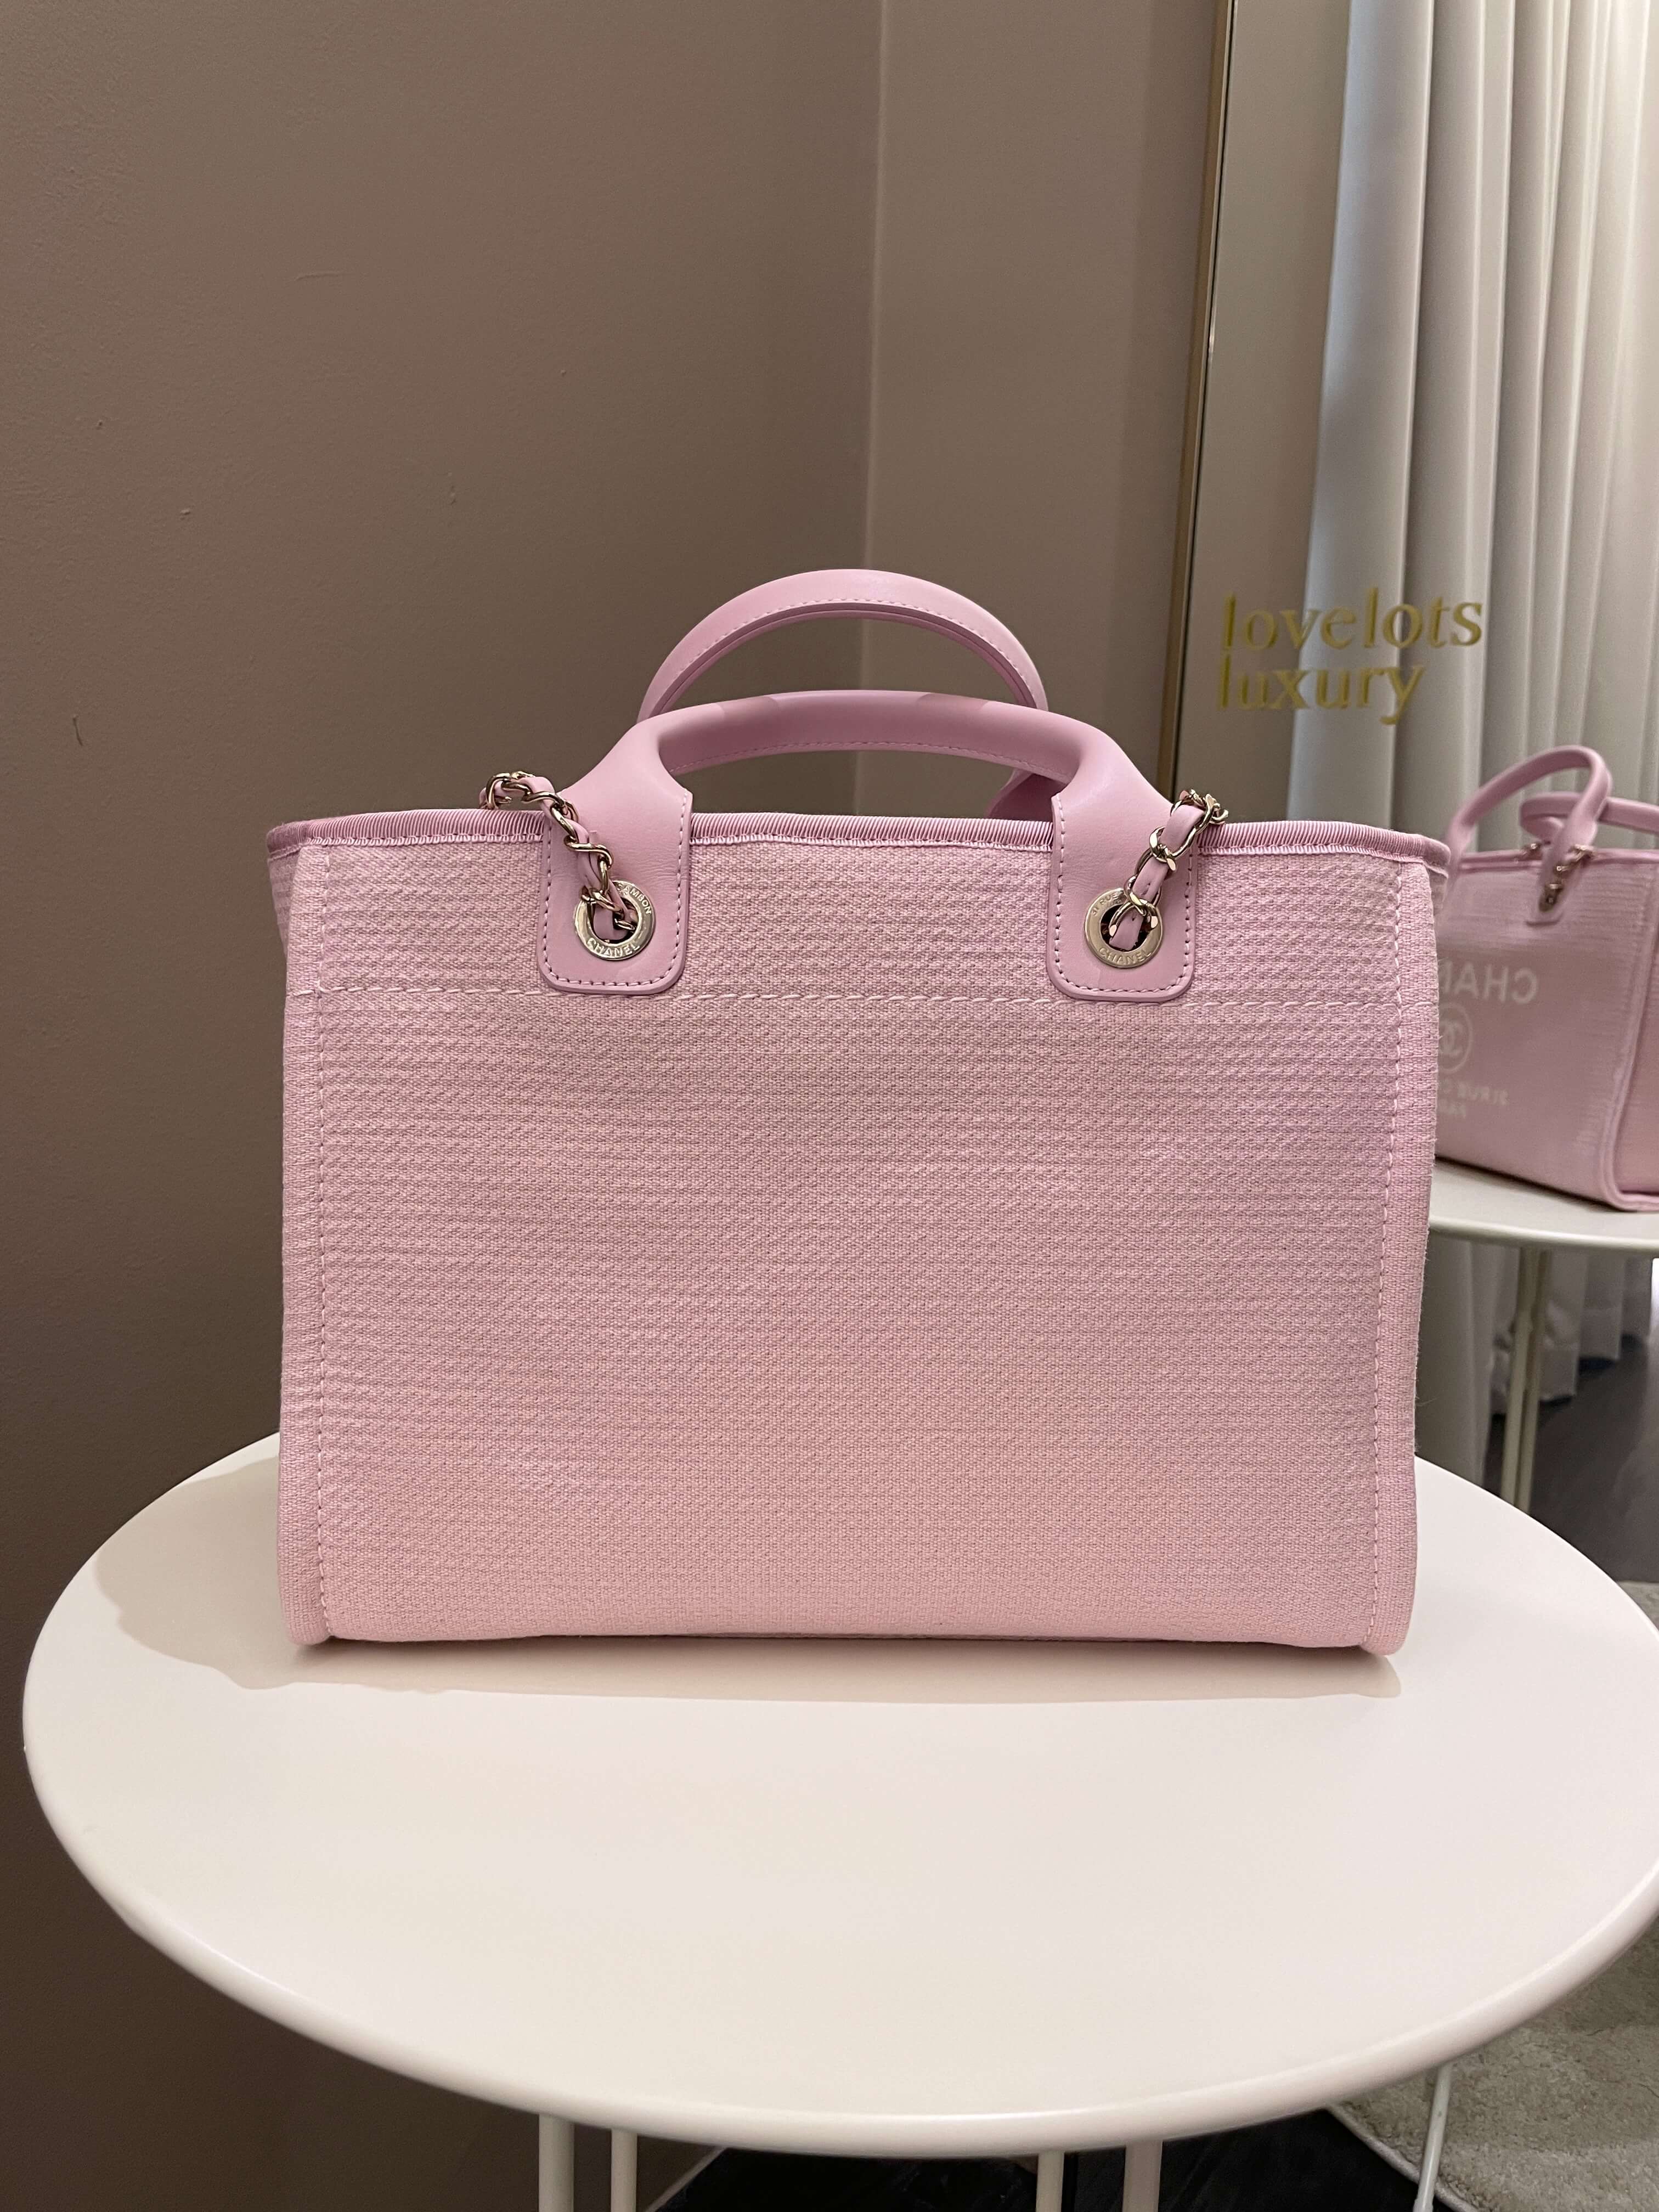 CHANEL Canvas Large Deauville Tote Pink 261658